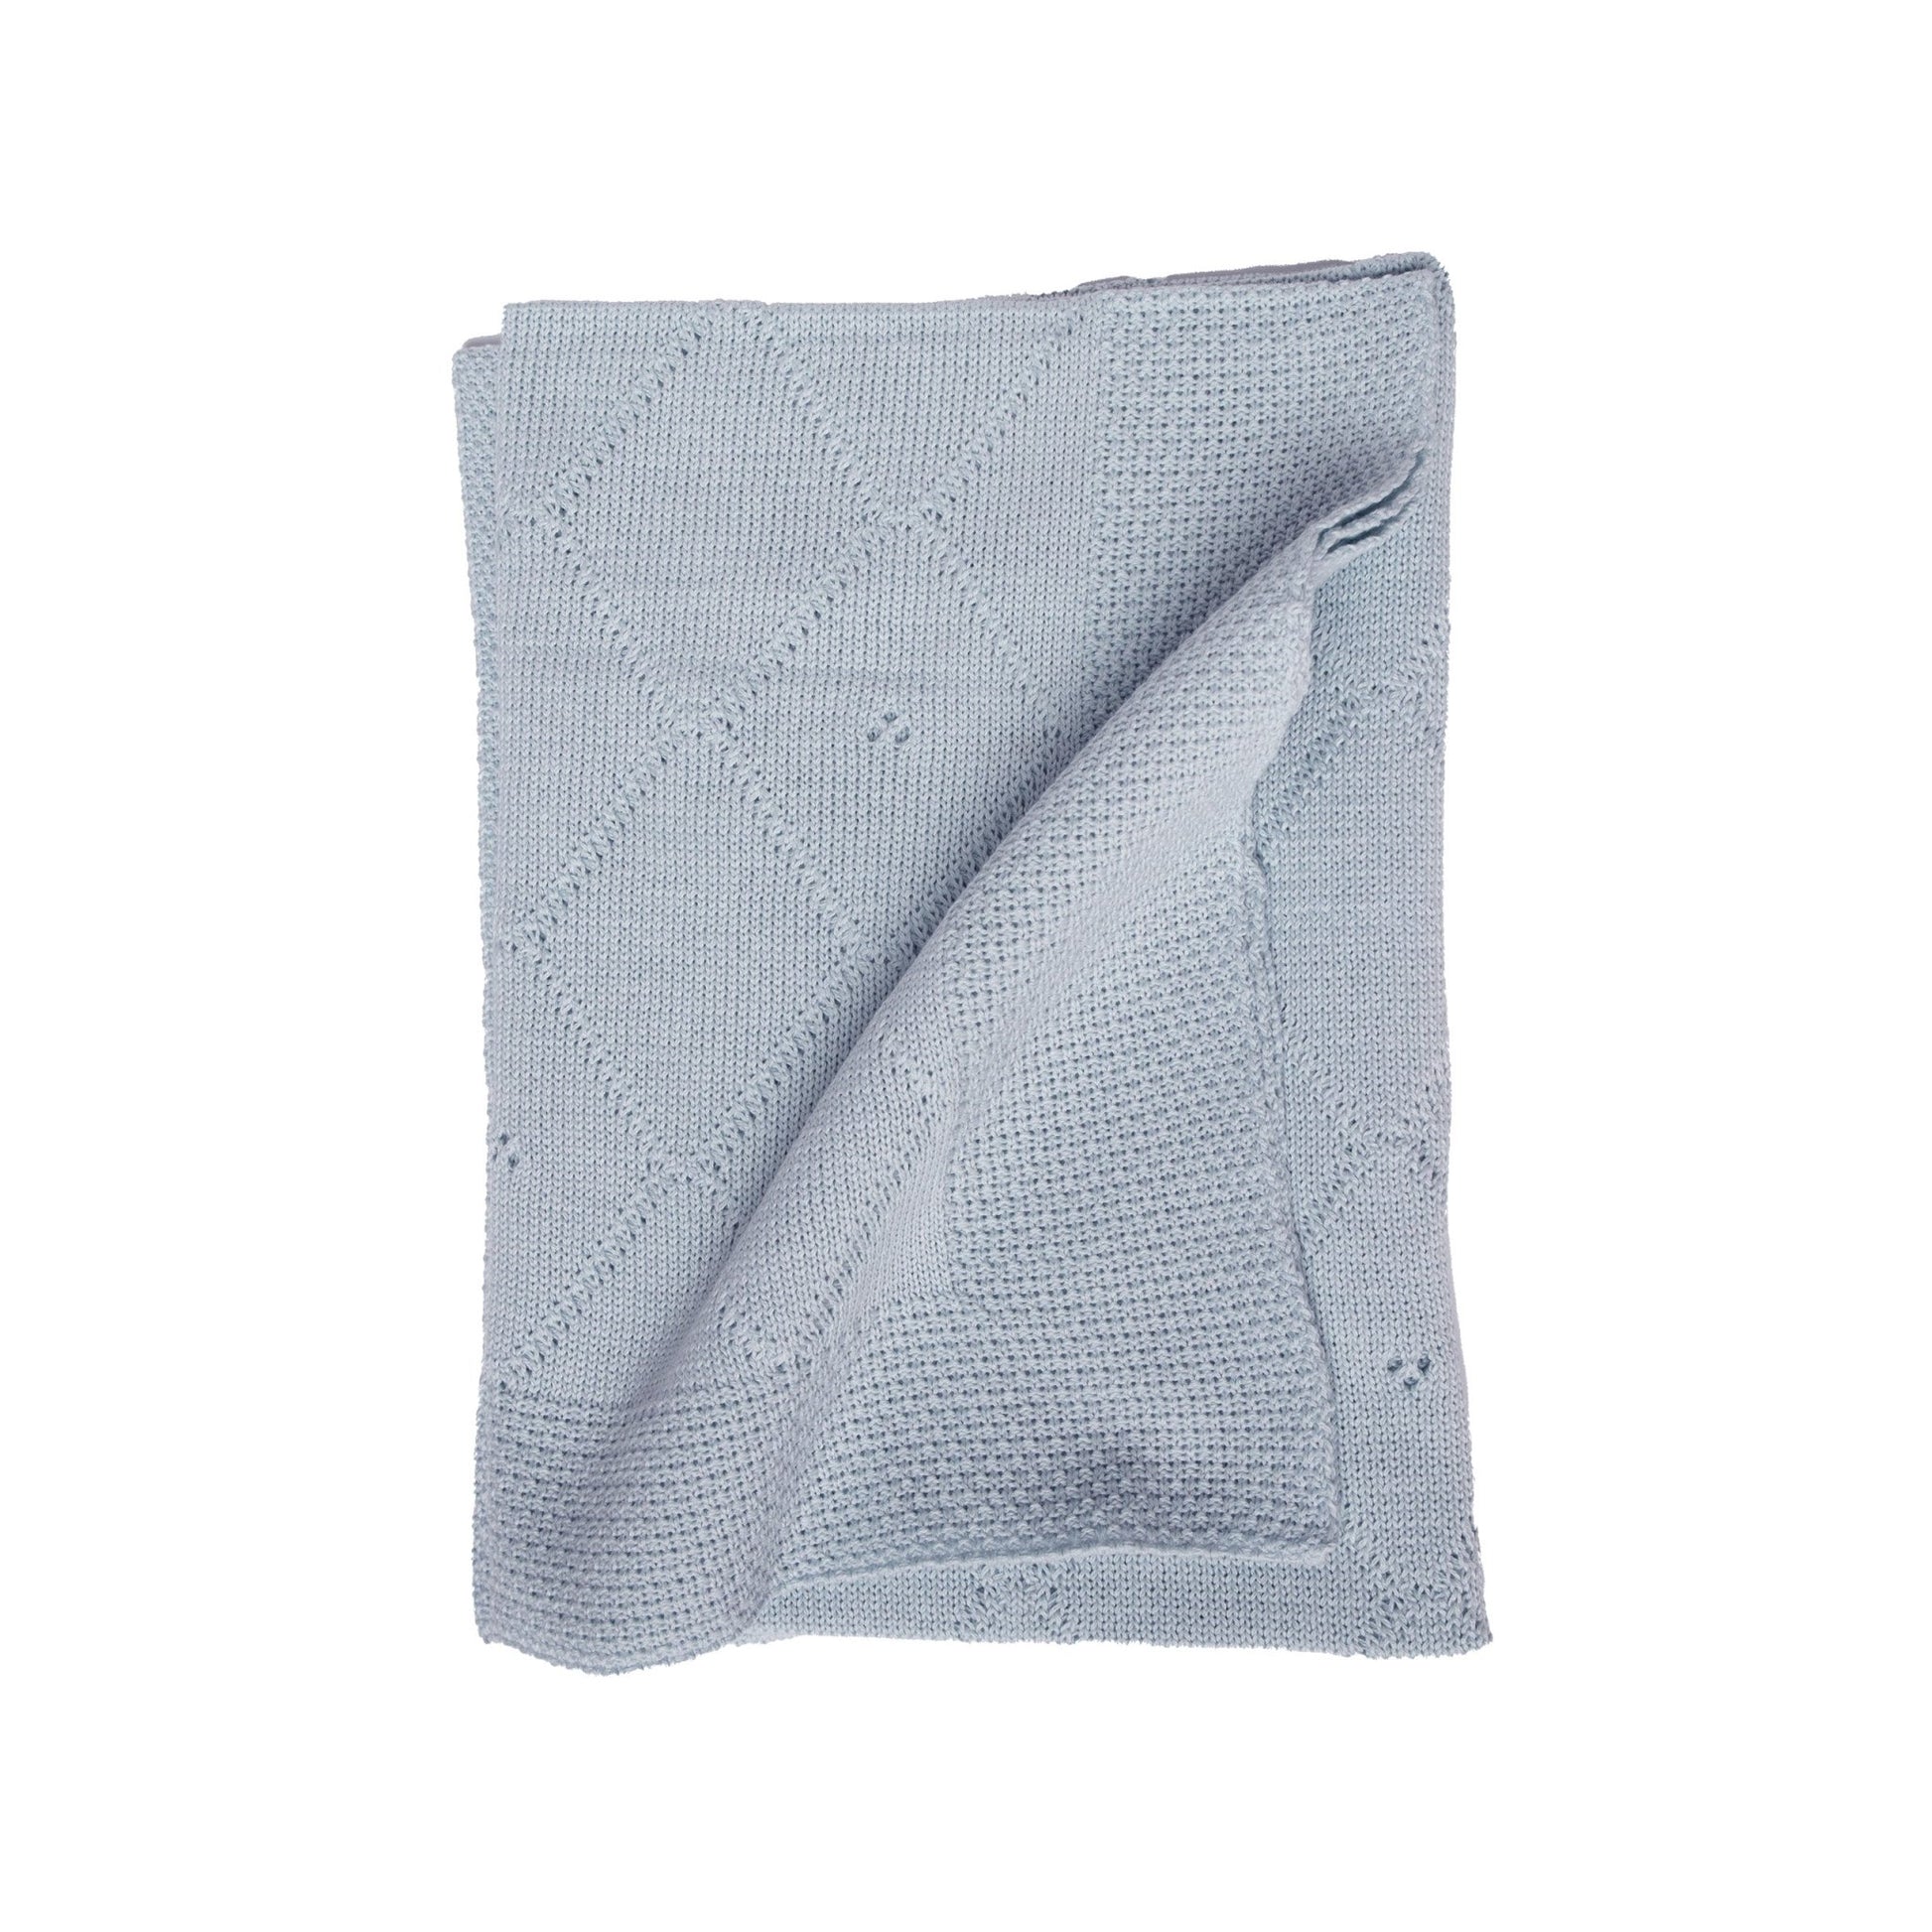 Classic Knit Receiving Blanket, Blue - Blissfully Lavender BoutiqueCuclie